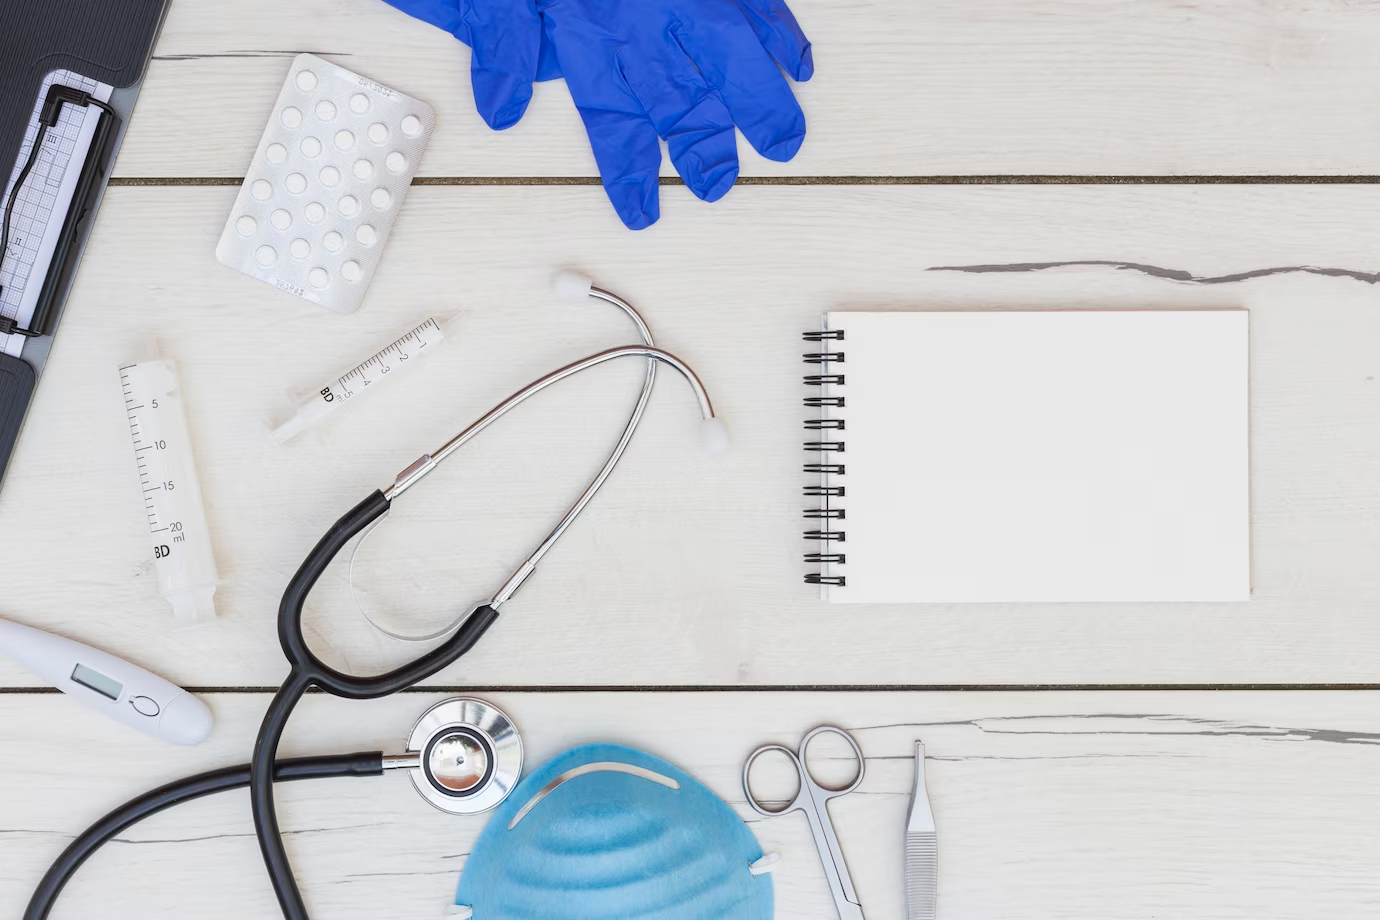 Medical equipment, gloves, pills, and spiral notepad on a white wooden desk, representing the essential tools for studying medicine in the UK.